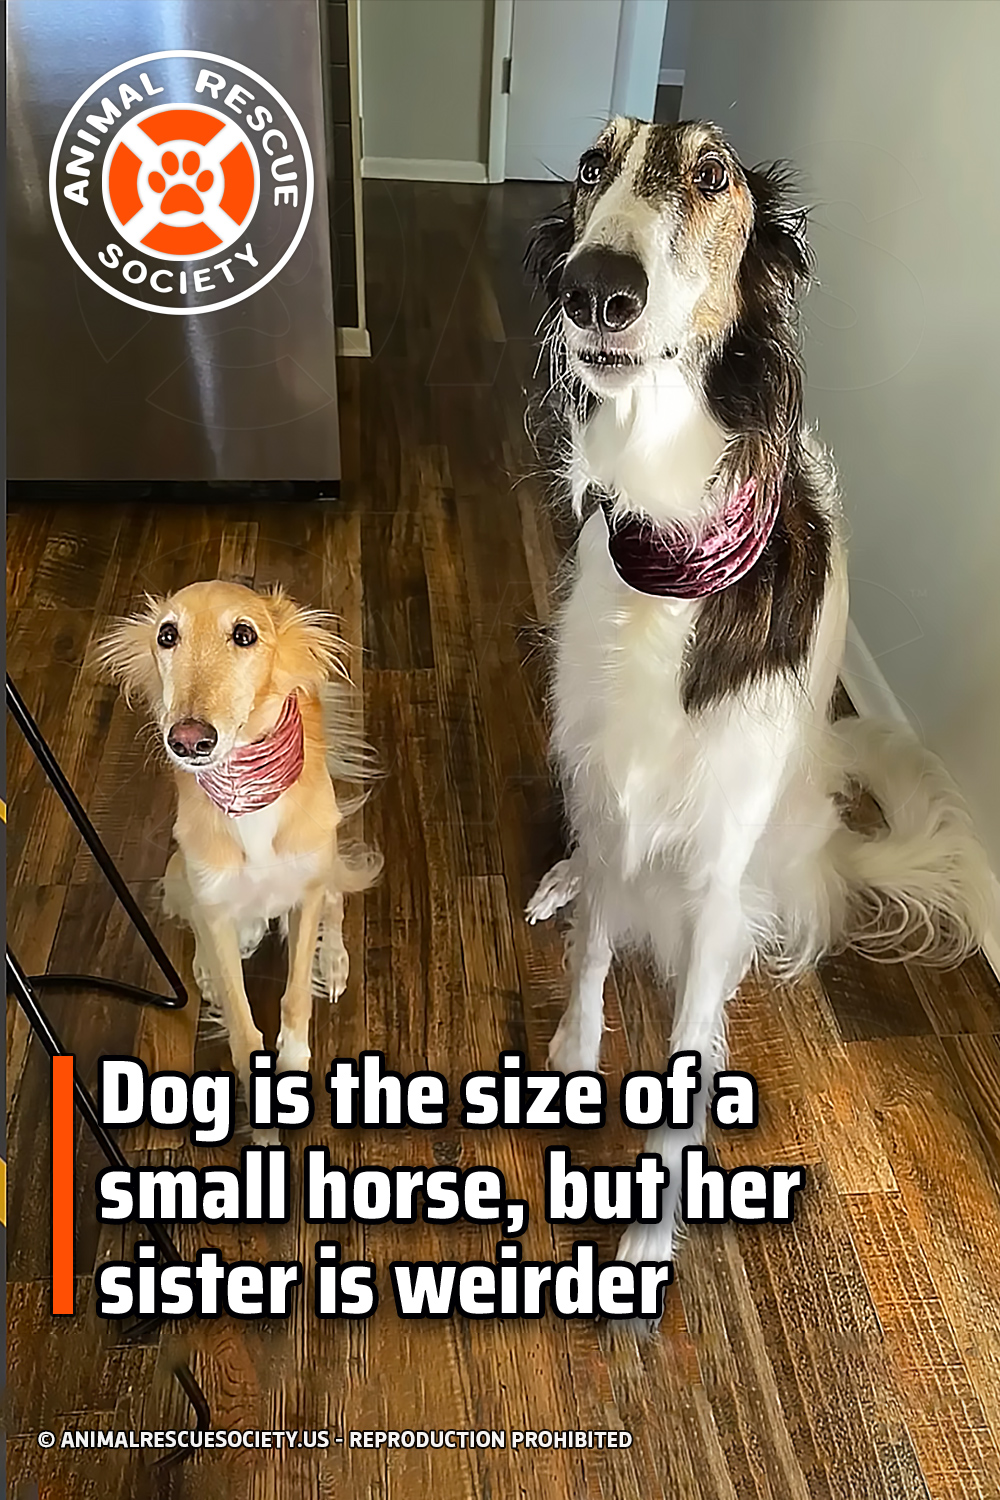 Dog is the size of a small horse, but her sister is weirder